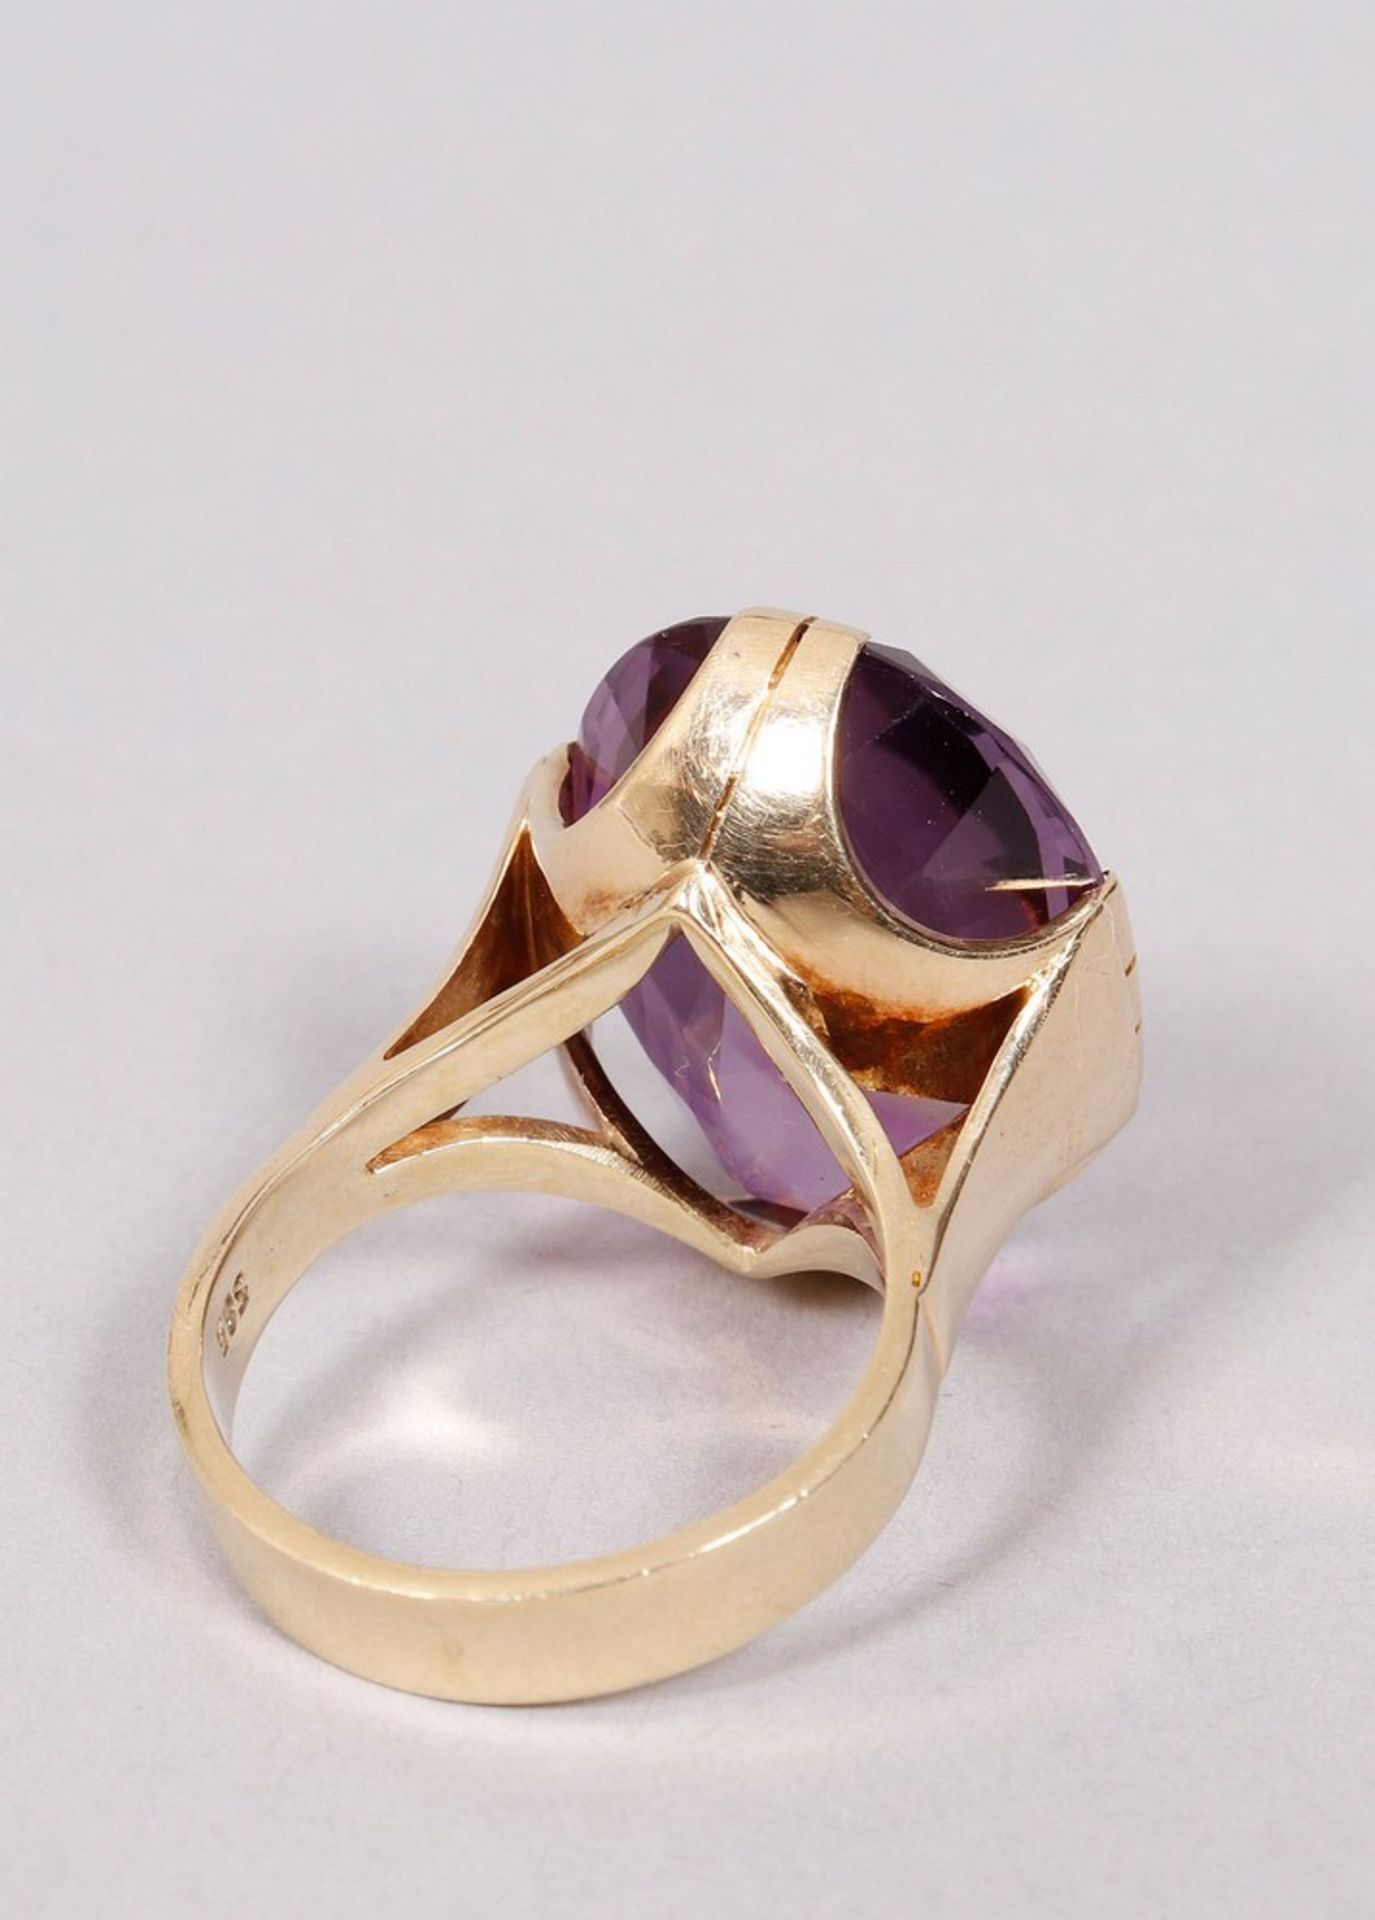 Ring, 585 gold - Image 3 of 4